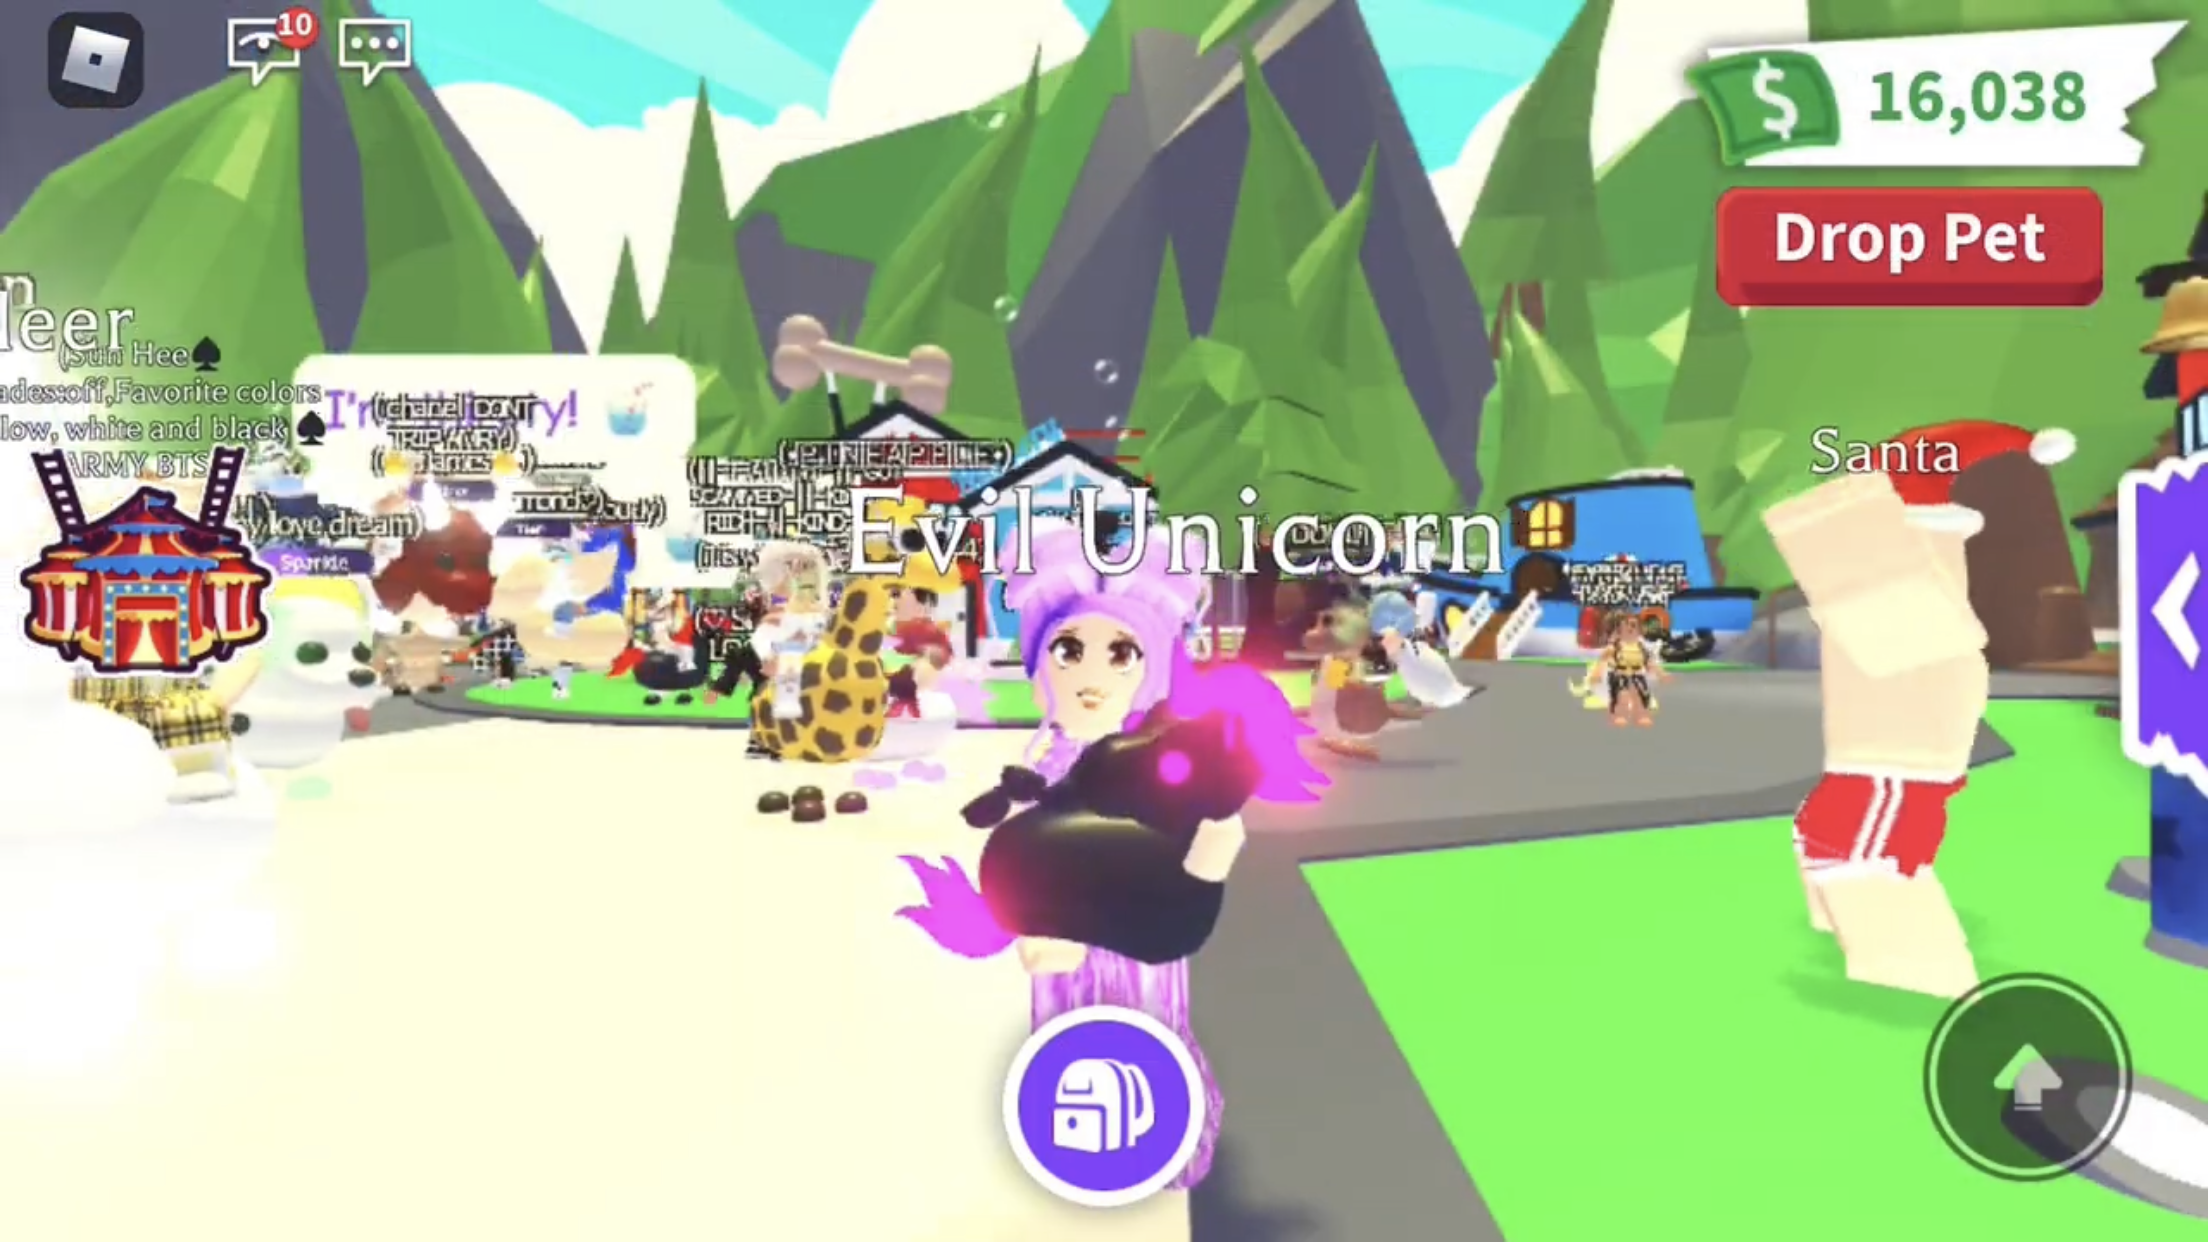 What Is A Neon Evil Unicorn Worth Adopt Me - roblox adopt me mega neon evil unicorn